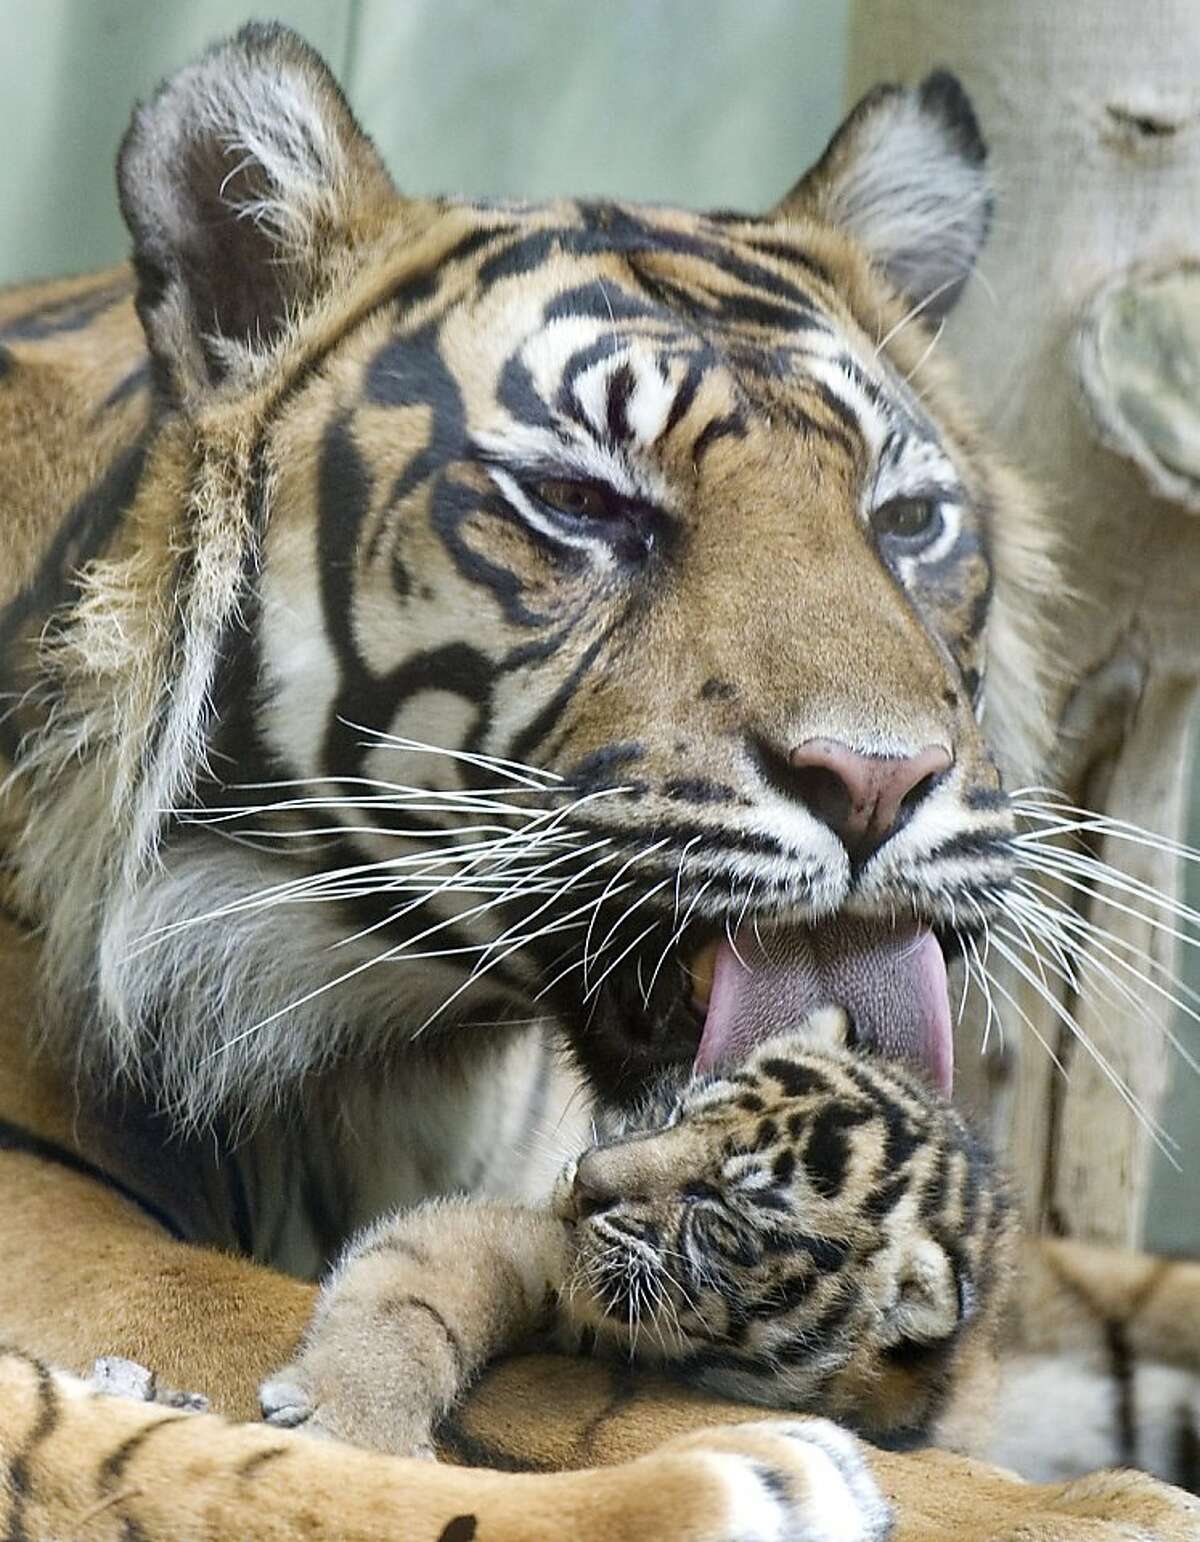 A Sumatran tiger named "Malea" cleans one of her cubs in their enclosure at the zoo in the central German city of Frankfurt am Main on May 25, 2011.